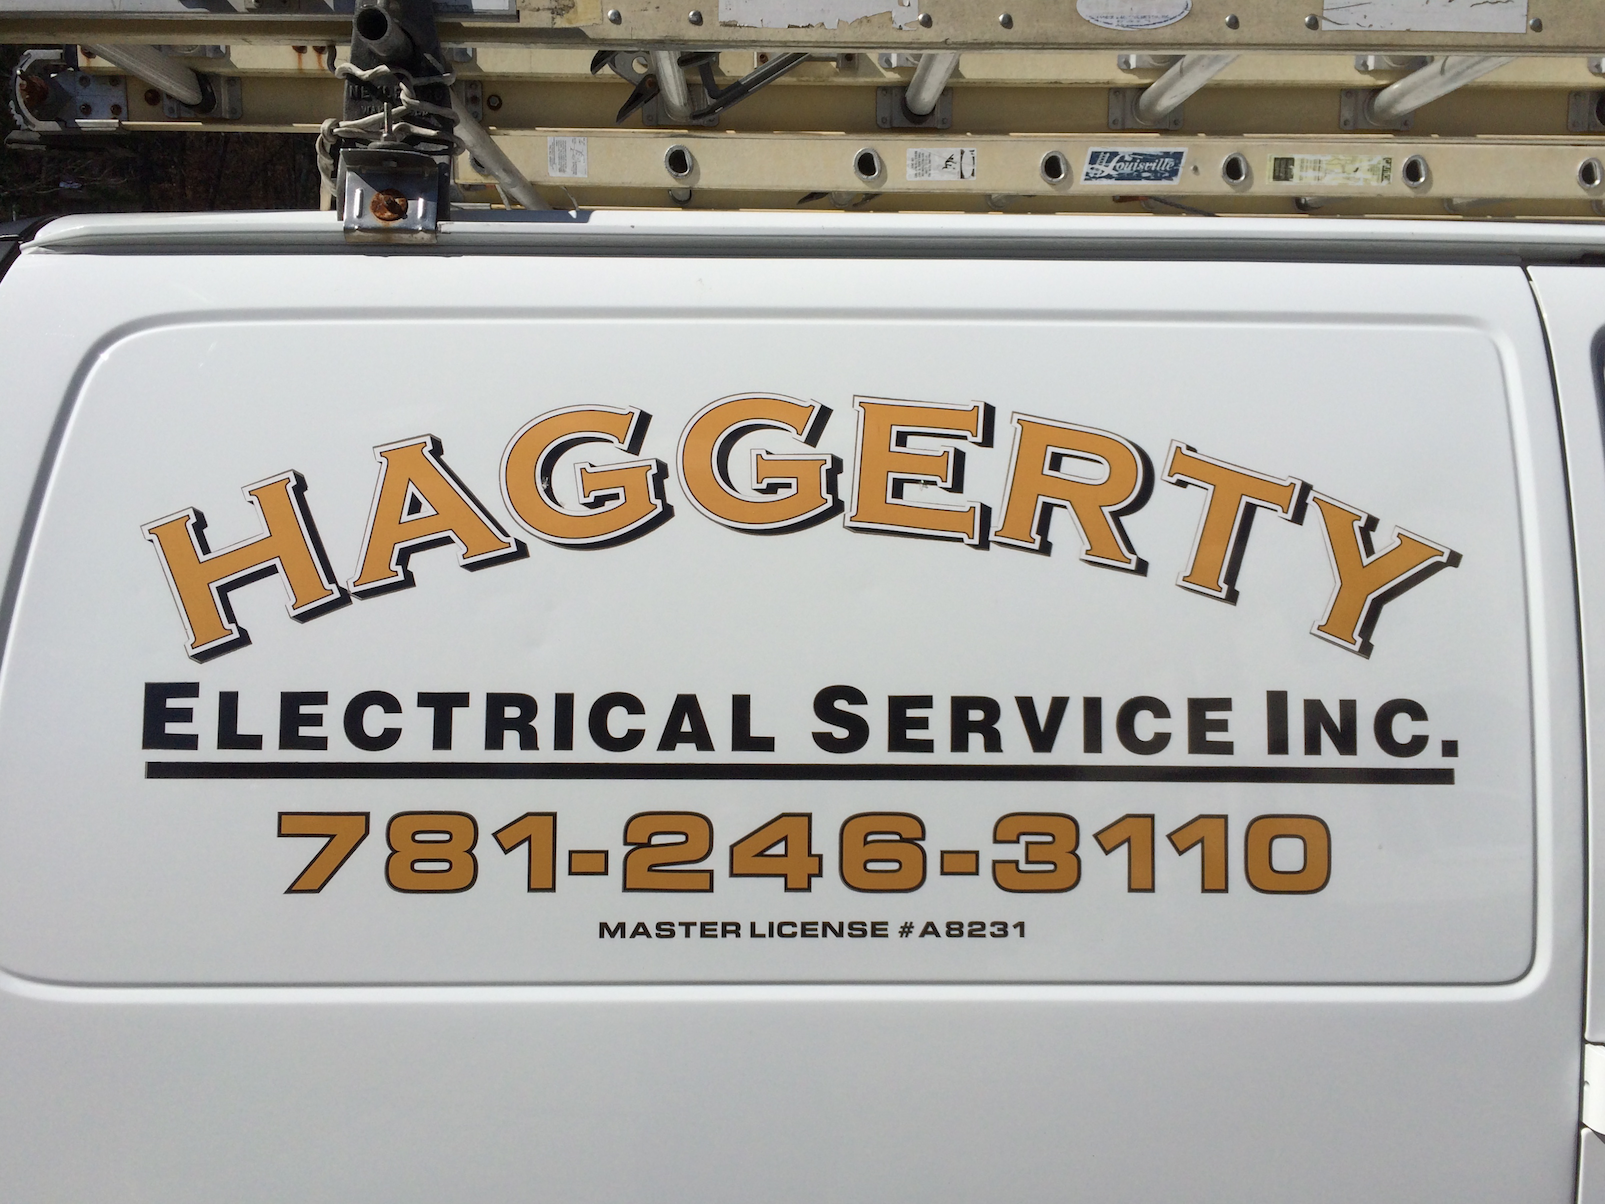 Haggerty Electrical Service Inc.